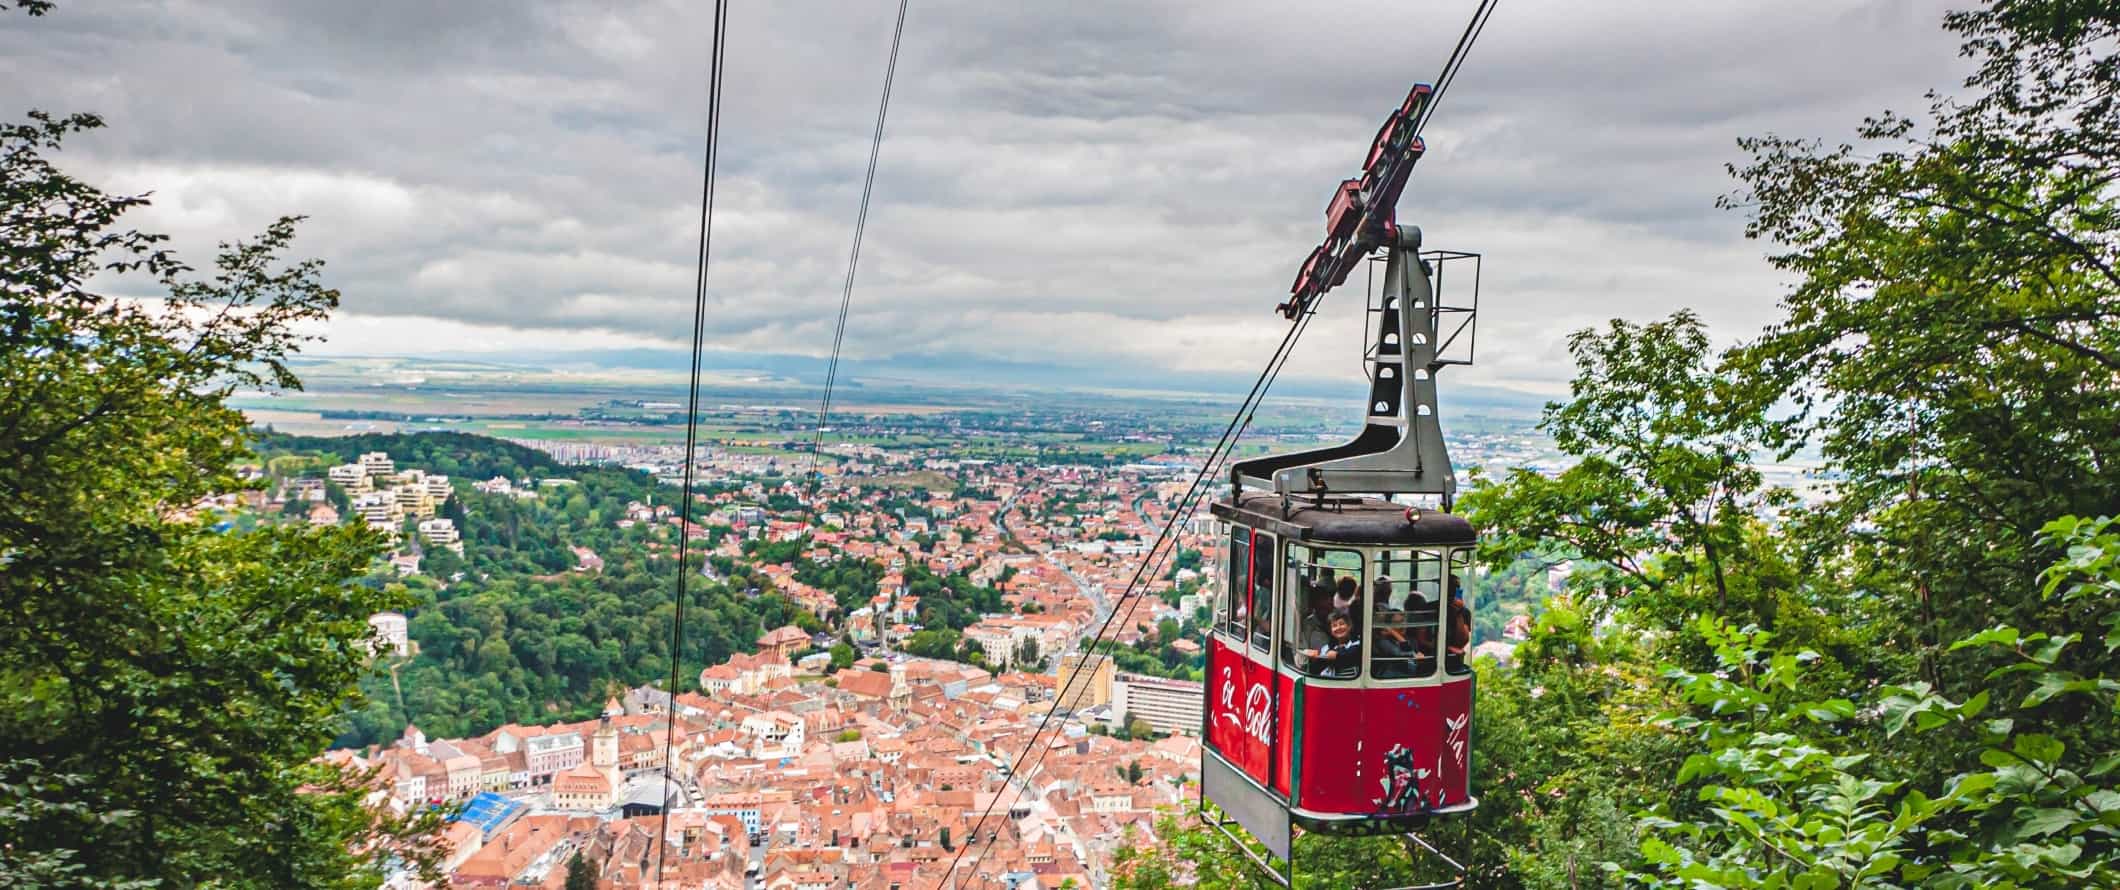 Cable car going up the mountain with the old town of Brasov, Romania in the background.